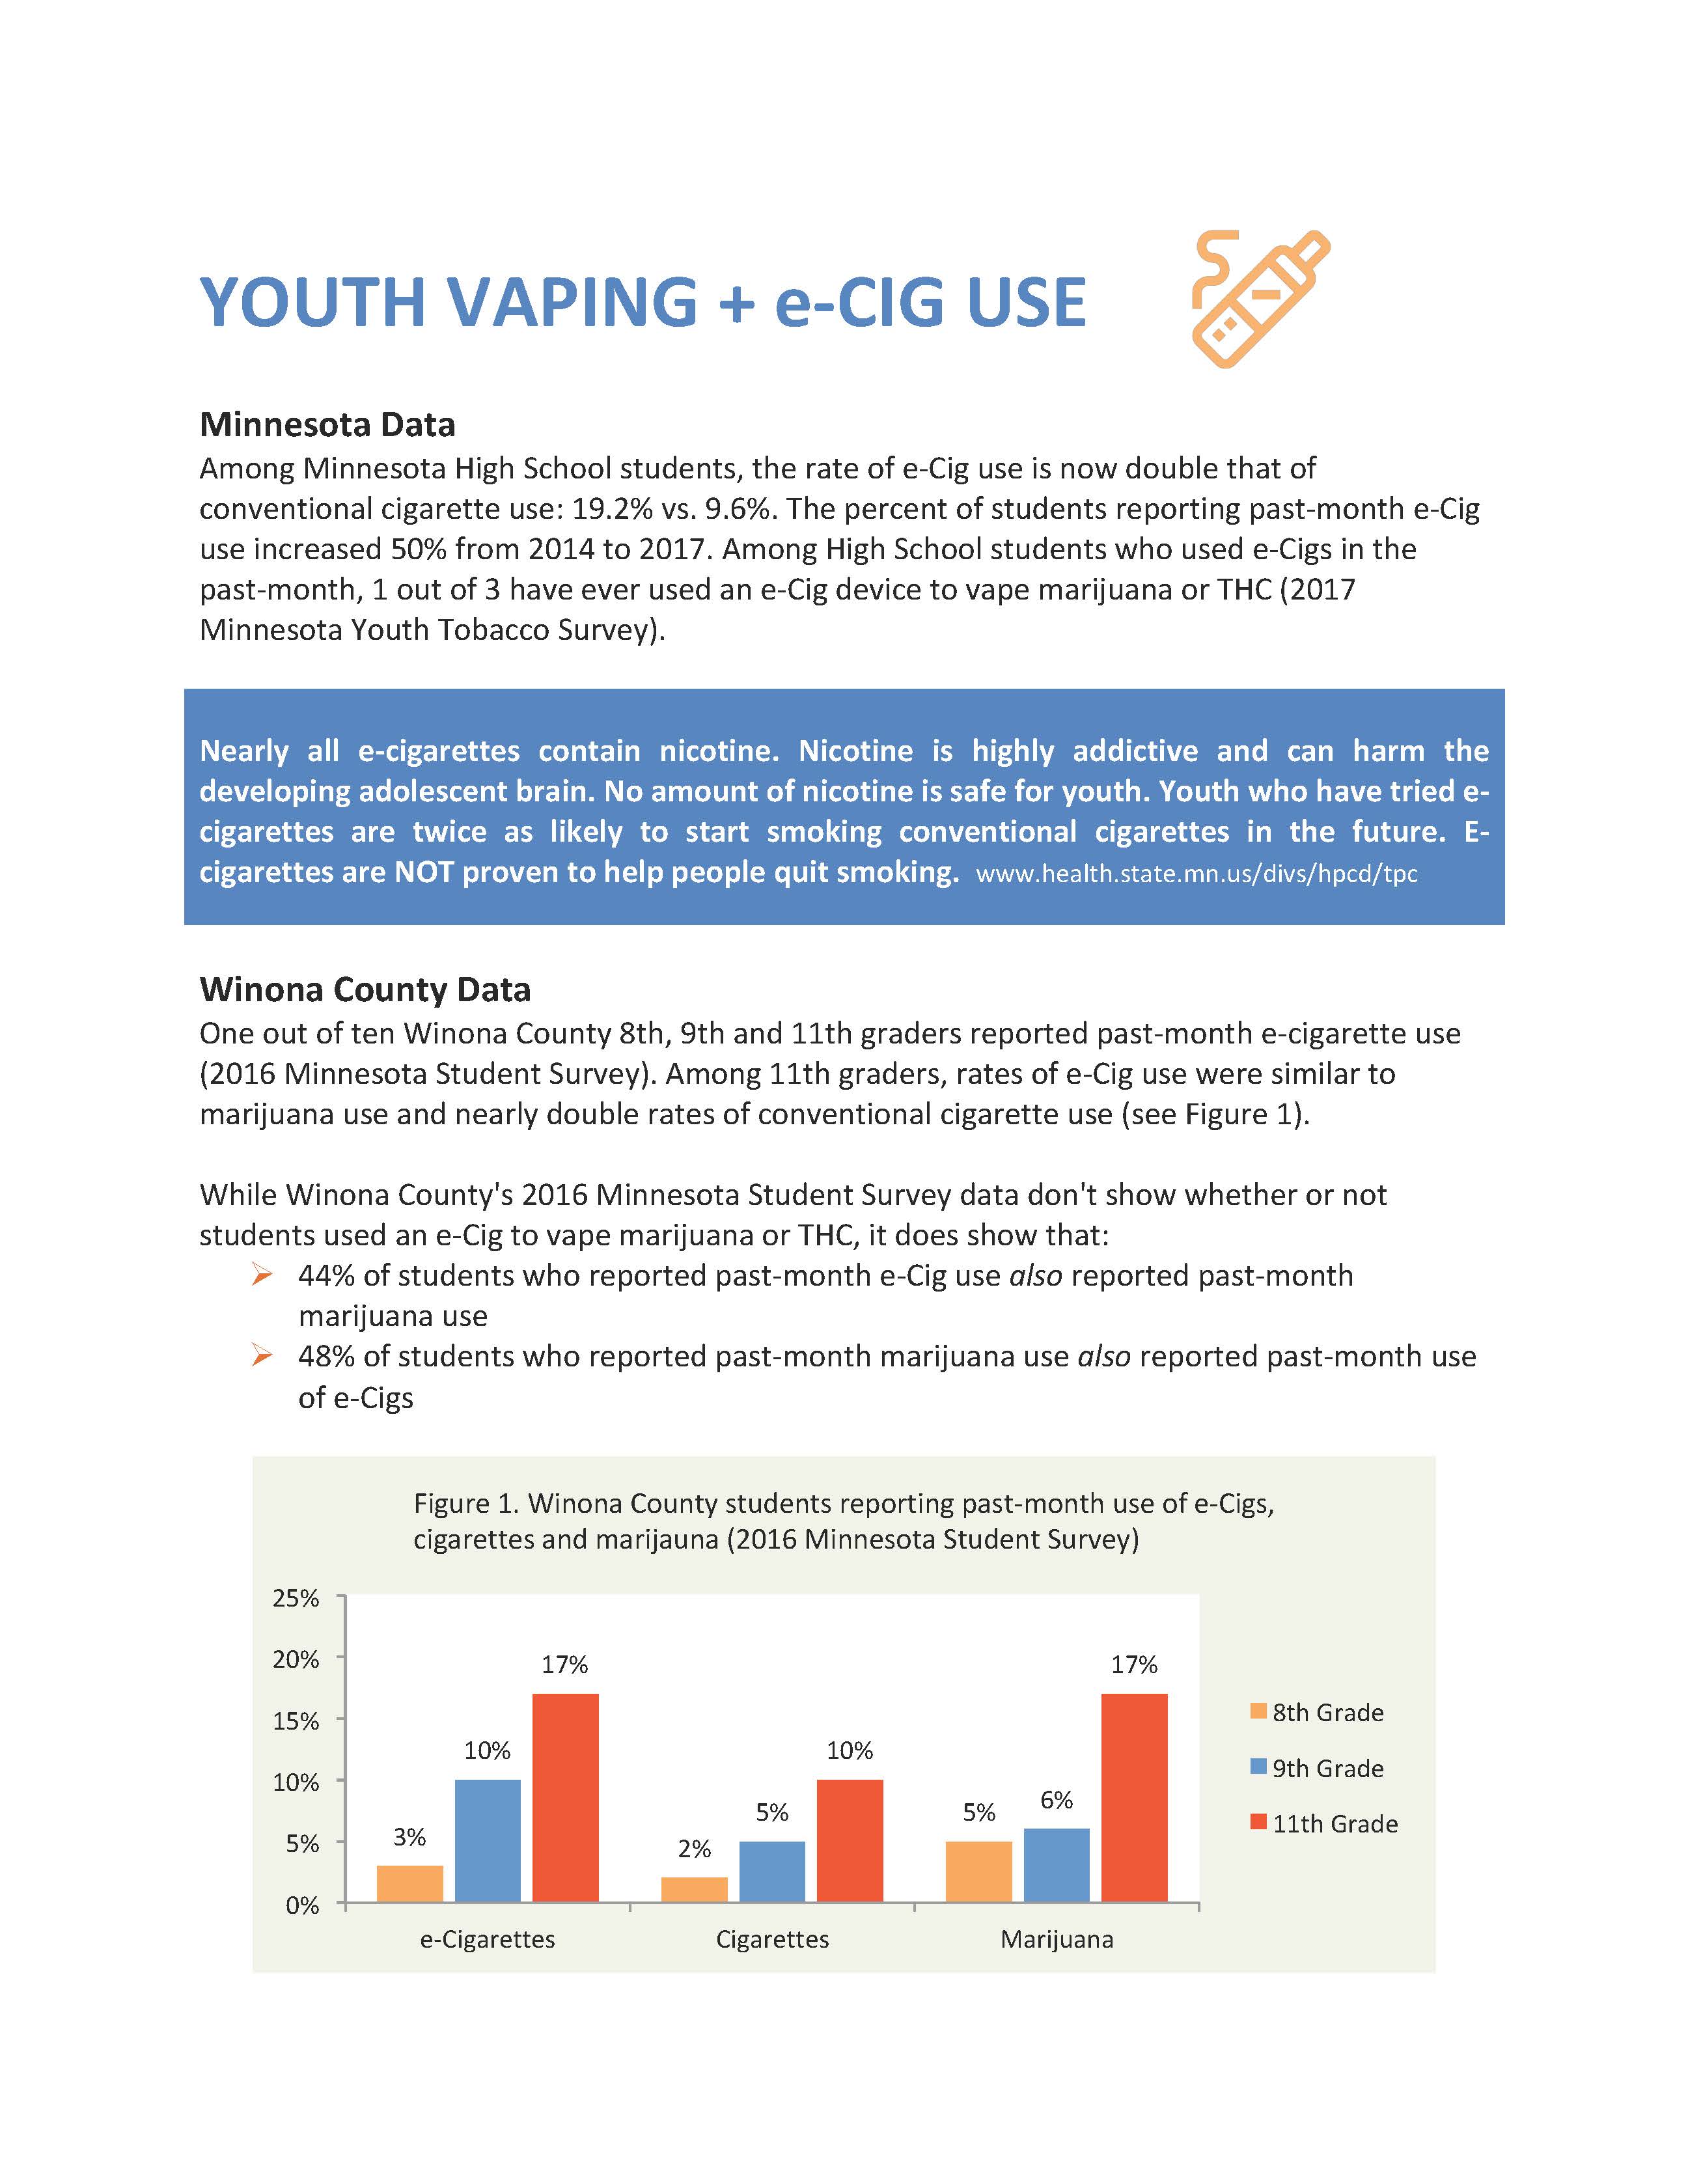 JPG of page 1 of Youth Vaping in Winona County fact sheet